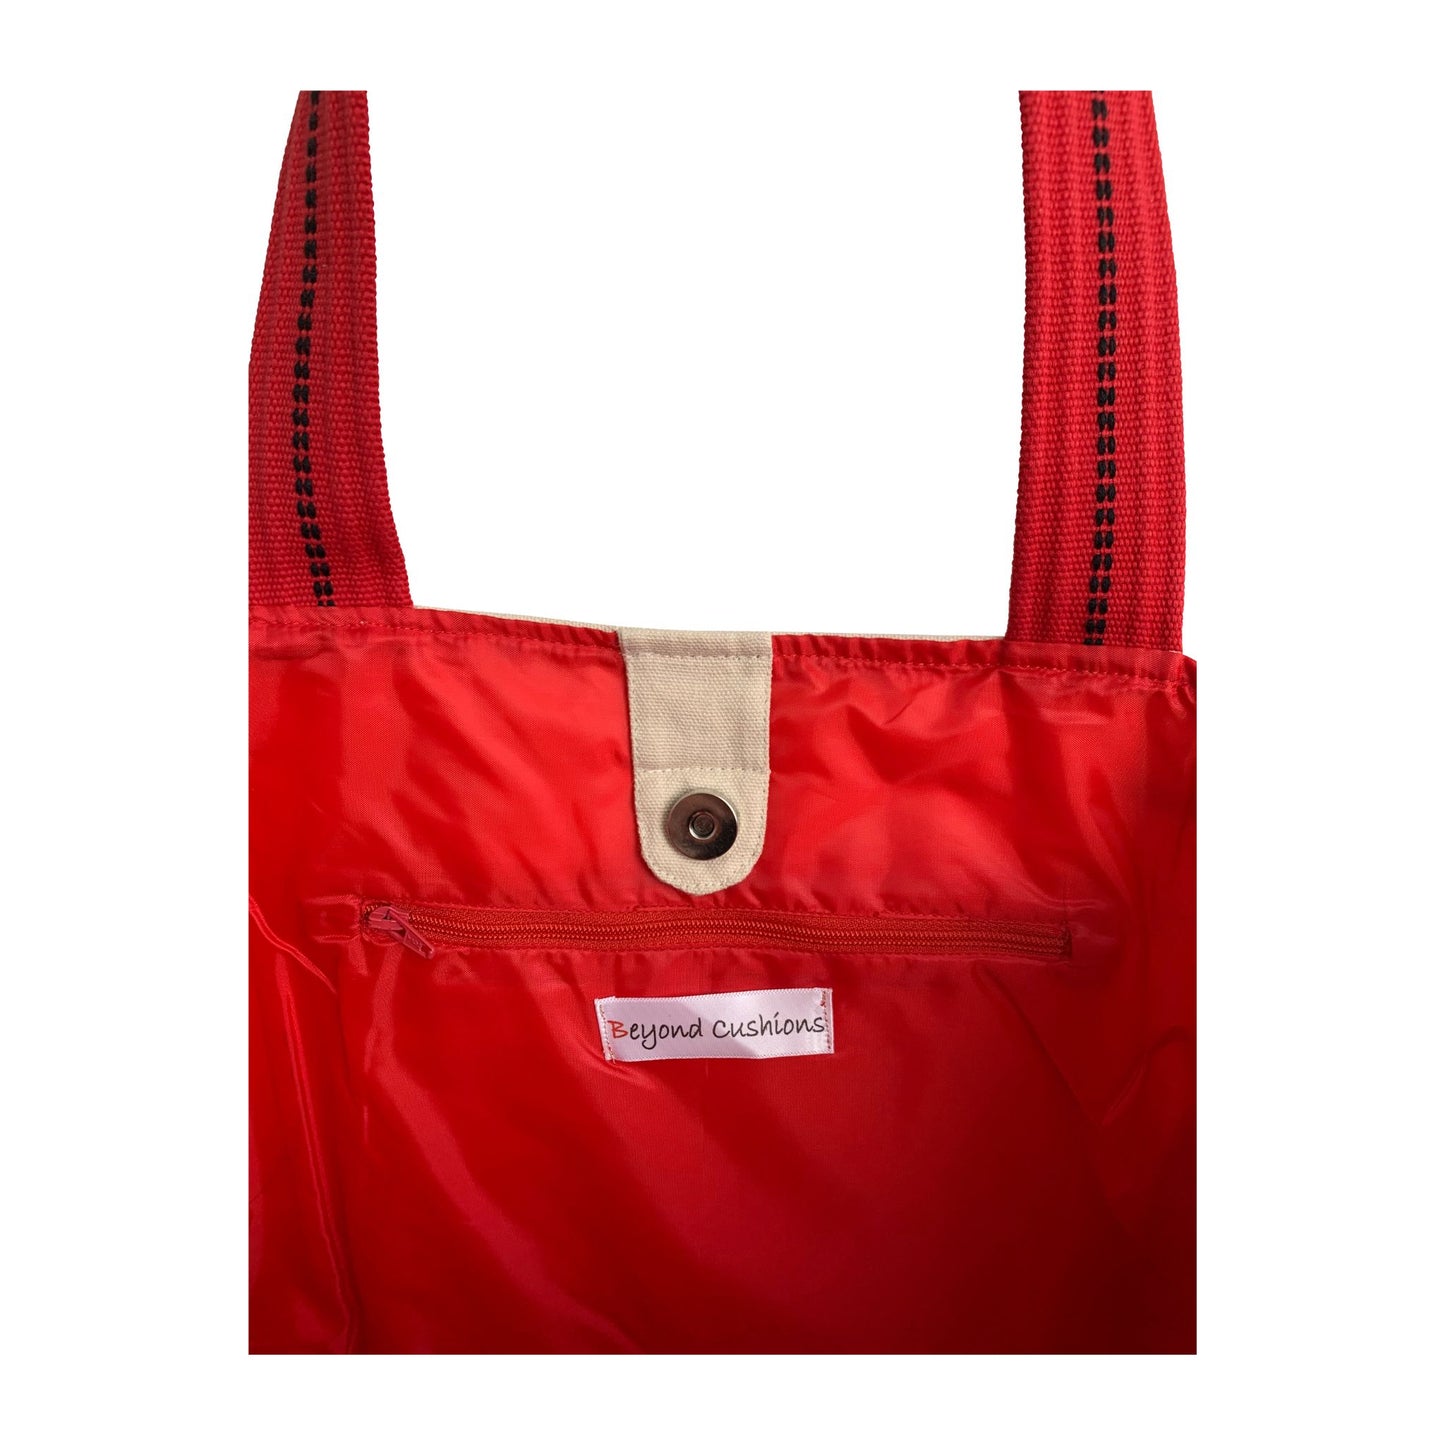 Embroidered City Artistry Collection Tote Bag - London